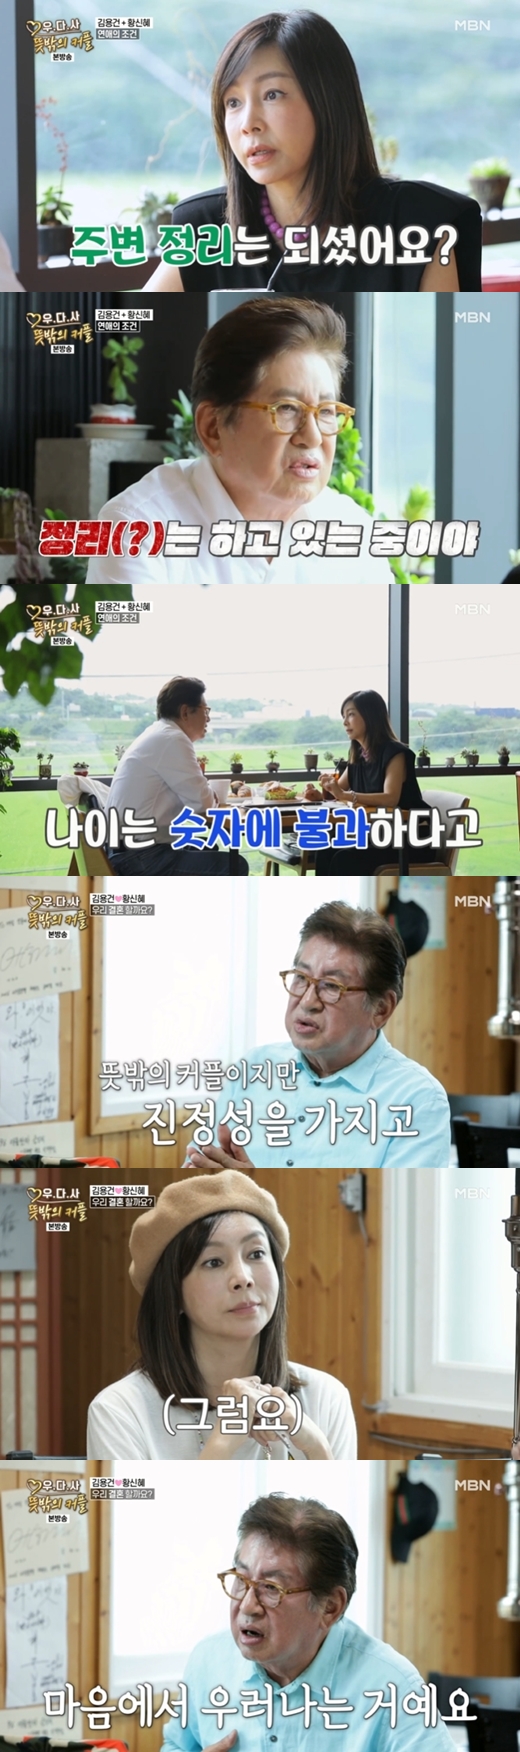 While actor Kim Yong-gun (76) has been accused of attempted abortion on a 39-year-old couple and apologized to the public, there is also a voice of criticism over Kim Yong-guns appearance in the entertainment.Kim Yong-gun appeared on MBN Can We Love Again 3-Unexpected Couple last year as a virtual couple with actor Hwang Shin-hye (real name Hwang Jung-man and 59).Kim Yong-gun is a virtual couple in Hwang Shin-hye and entertainment at the time, but emphasized, I am serious because I am genuine and have a word, an eye or a heart.At that time, Hwang Shin-hye also agreed that he was completely serious.Kim Yong-gun and 39-year-old A (37) first met in 2008, according to Dispatch, who first reported the Kim Yong-gun incident.Thirteen years ago, Kim Yong-gun was 63 years old and A was 24 years old.Kim Yong-gun said, I knew about A from the other party for a long time, Kim Yong-gun said in a statement issued by lawyer Ari Yul Lim Bangle, a legal representative on the day. I sometimes stopped by the house where my children became empty nests after independence.Moy Yat I did not have a contact or face, but every time I met, I was glad and I had a good relationship with each other. Some netizens point out that Kim Yong-guns remarks in the reality program are a result of the audience, although it is a virtual couple in the entertainment.In addition, Kim Yong-gun was nervous when he first met Hwang Shin-hye and asked, But are you all right?Also, when Hwang Shin-hye said, Its been a long time since I was sitting alone with a man, Kim Yong-gun said, Ive been a week.Meanwhile, Kim Yong-gun said that he was aware of As pregnancy in early April and said, I heard that it was four weeks before.As for the reason for opposing Mr. As Child Birth, he said, I was ahead of surprise and worry rather than joy because I did not promise or plan for the future.Everything has come at once, including my age, parenting ability, the face of Sons, and social gaze. I could not discuss this situation with anyone at the time, and I appealed to the other person only to the situation I was in and said that I could not have a child,I tried to beg, I tried to complain, and I was angry. Kim Yong-gun initially opposed As Child Birth, but later claimed that he informed two sons of the pregnancy, including actor Ha Jung-woo (real name Kim Sung-hoon and 44), and delivered several times to Mr. As side that he would take responsibility for smooth Child Birth and upbringing.Kim Yong-gun said, I think the wound of the other persons heart was bigger than I thought.I am very sorry that my apology and sincerity have not been conveyed.  I will do my best to recover the wounds of the other party and to raise a healthy Child Birth.If there is something that is against the law, it will be taken if there is something to be responsible. Kim Yong-gun married a non-entertainer woman in 1977 and diverted in 1996; there are two sons, Ha Jung-woo and others.Kim Yong-gun.First of all, I am sorry to have caused the sudden news of the defendant.I also feel sorry for my mother and child who are in a legal dispute with me in an unexpected state, but have been hurt by my heart.I have not expected this to lead to a legal dispute called complaint because I have told my opponent several times that I will support and take responsibility for Child Birth.I am deeply moved to think that my wrong behavior has caused me to be blessed, and that the child to be born will know the fact of the defendant.Ive known him a long time ago.After my children became independent, I stopped by the house, which became an empty nest, sometimes in a bright way, and when I was alone, I took care of me a lot and I always felt grateful to this friend.Moy Yat Even though I did not get in touch or look at my face, I was glad every time I met and I had a good relationship with each other.In early April 2021, I heard from the other party that it was four weeks of pregnancy, and since we had not promised or planned for each other, we were ahead of surprise and worry rather than joy.All at once, my age and parenting skills, my vision of Sons, my social gaze, and so on.I could not discuss this situation with anyone at the time, and I told the other person that I could not have a child by appealing only to the situation I was in.I begged, complained, and angry, but the other person emphasized the importance of life and blocked my contact on May 21, 2021, saying that I should only talk to my lawyer.It was a little late, but I realized that the child was more precious than face, informed Sons of the pregnancy, and unlike worry, Sons welcomed the new life as a blessing.I received the support of Sons and from May 23, 2021 until recently, I told my opponent and my lawyer that I will take responsibility for smooth child birth and child care.Now, I am deeply aware that the smooth child birth and health recovery of the other person, and the health of the new child are the most important.But I think the other persons heart was hurt more than I thought. I feel sorry that my apology and sincerity have not been conveyed.I will do my best to recover the other persons wounds and to raise a healthy Child Birth, and if there is any law against it, I will lose if there is a responsibility.I will be subject to any such scolding, but I would like to ask you to refrain from provocative reports or comments for the prospective mother and the child to be born.I will repeat the situation as soon as it is settled.Im sorry and thank you.